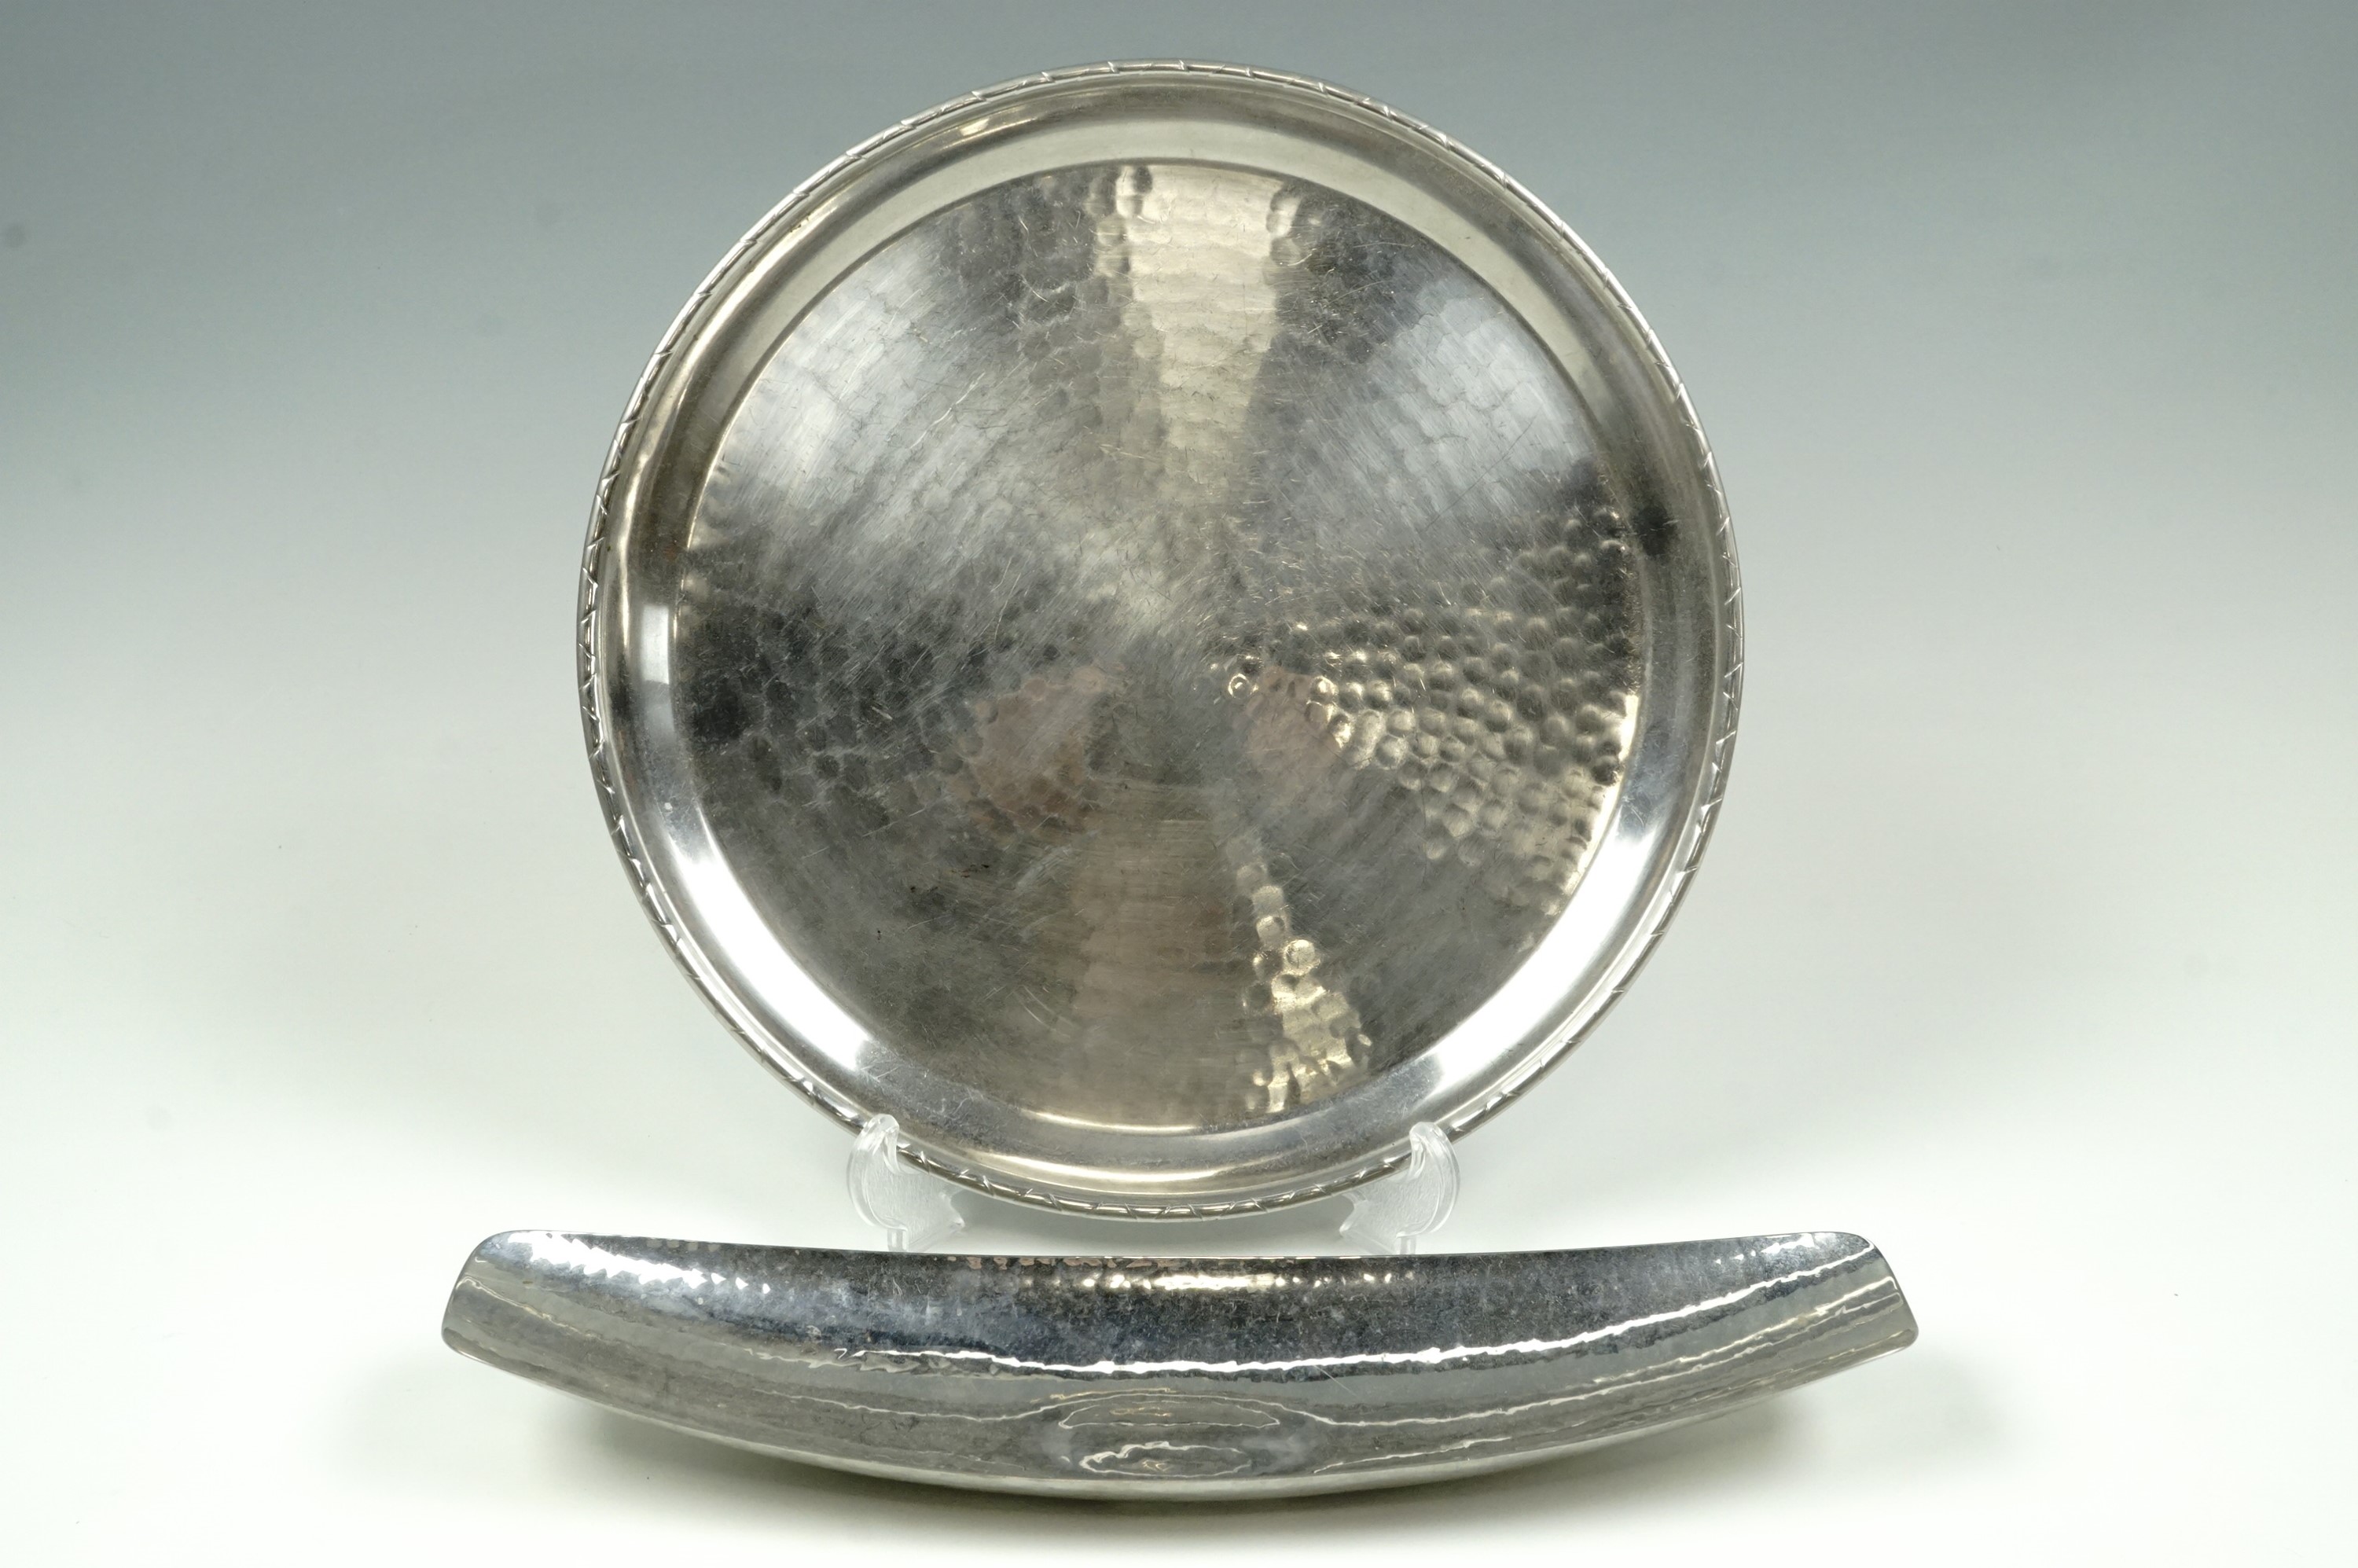 A Keswick School of Industrial Art dish 32.5 cm long together with a Lakeland Rural Industries